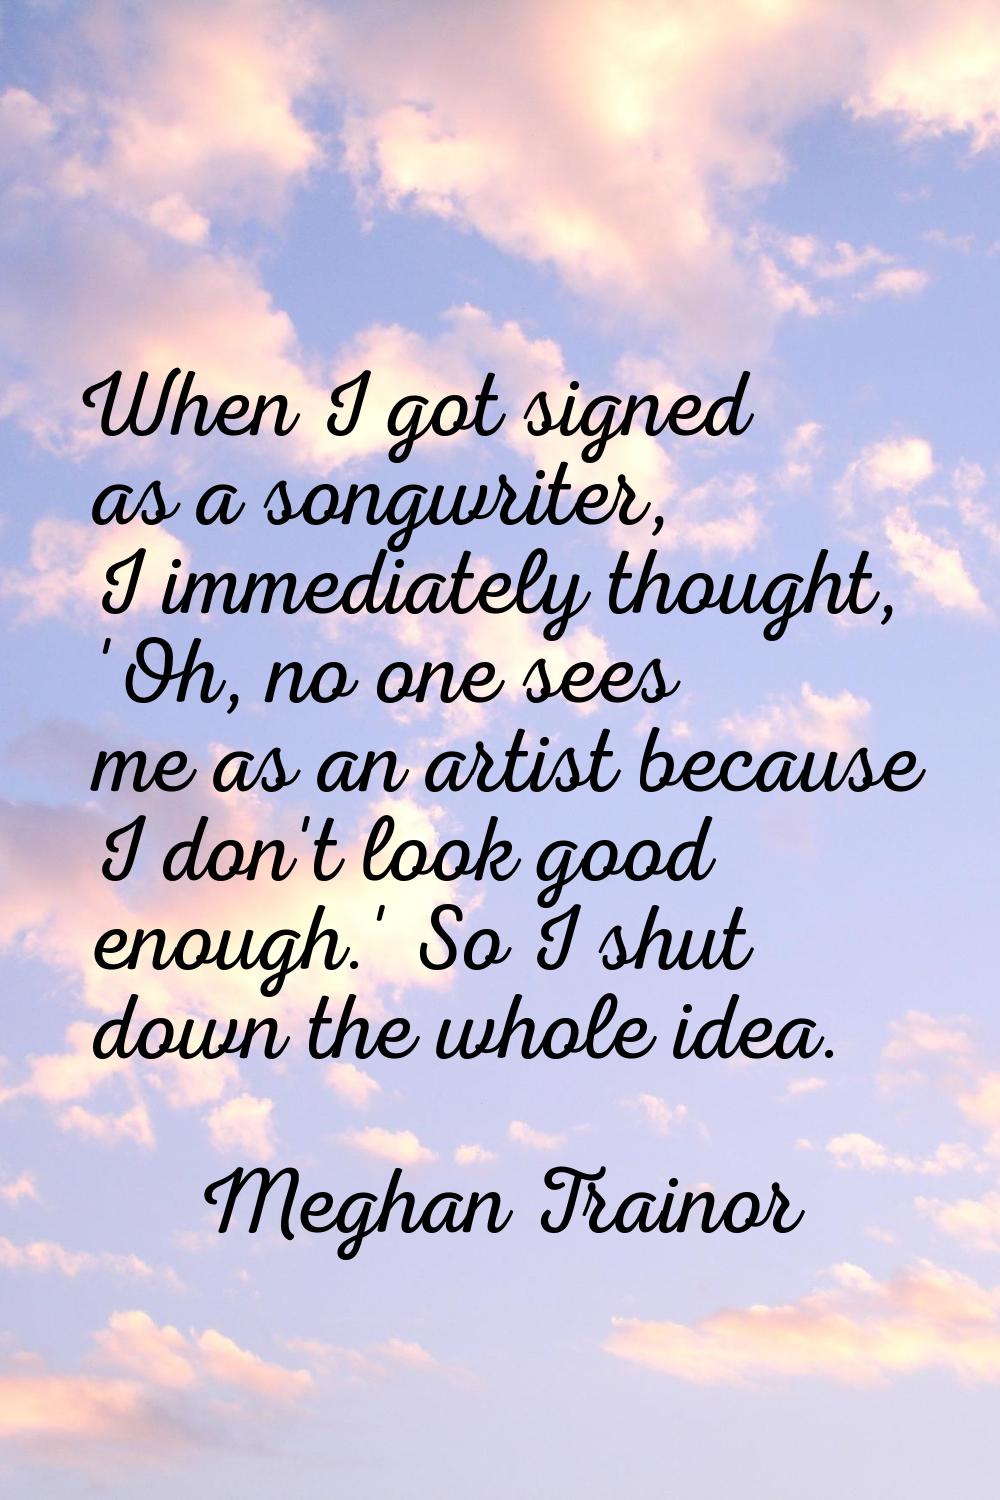 When I got signed as a songwriter, I immediately thought, 'Oh, no one sees me as an artist because 